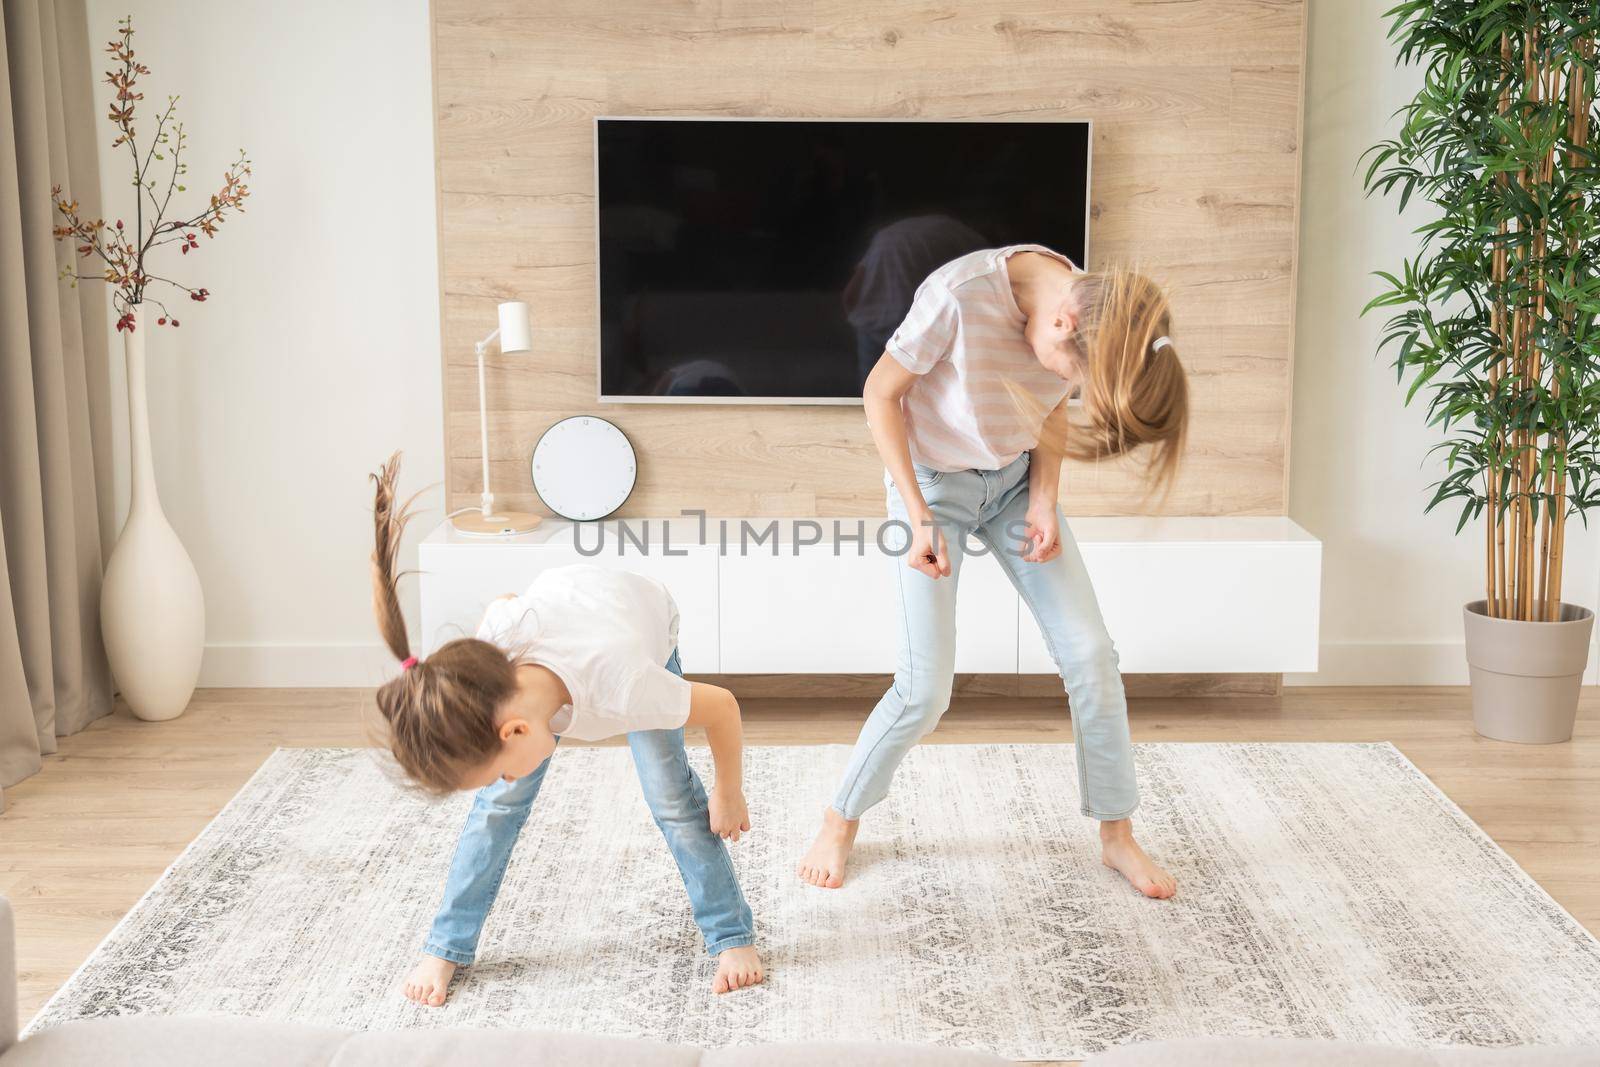 Two sisters having fun dancing in living room, happy family concept by Mariakray